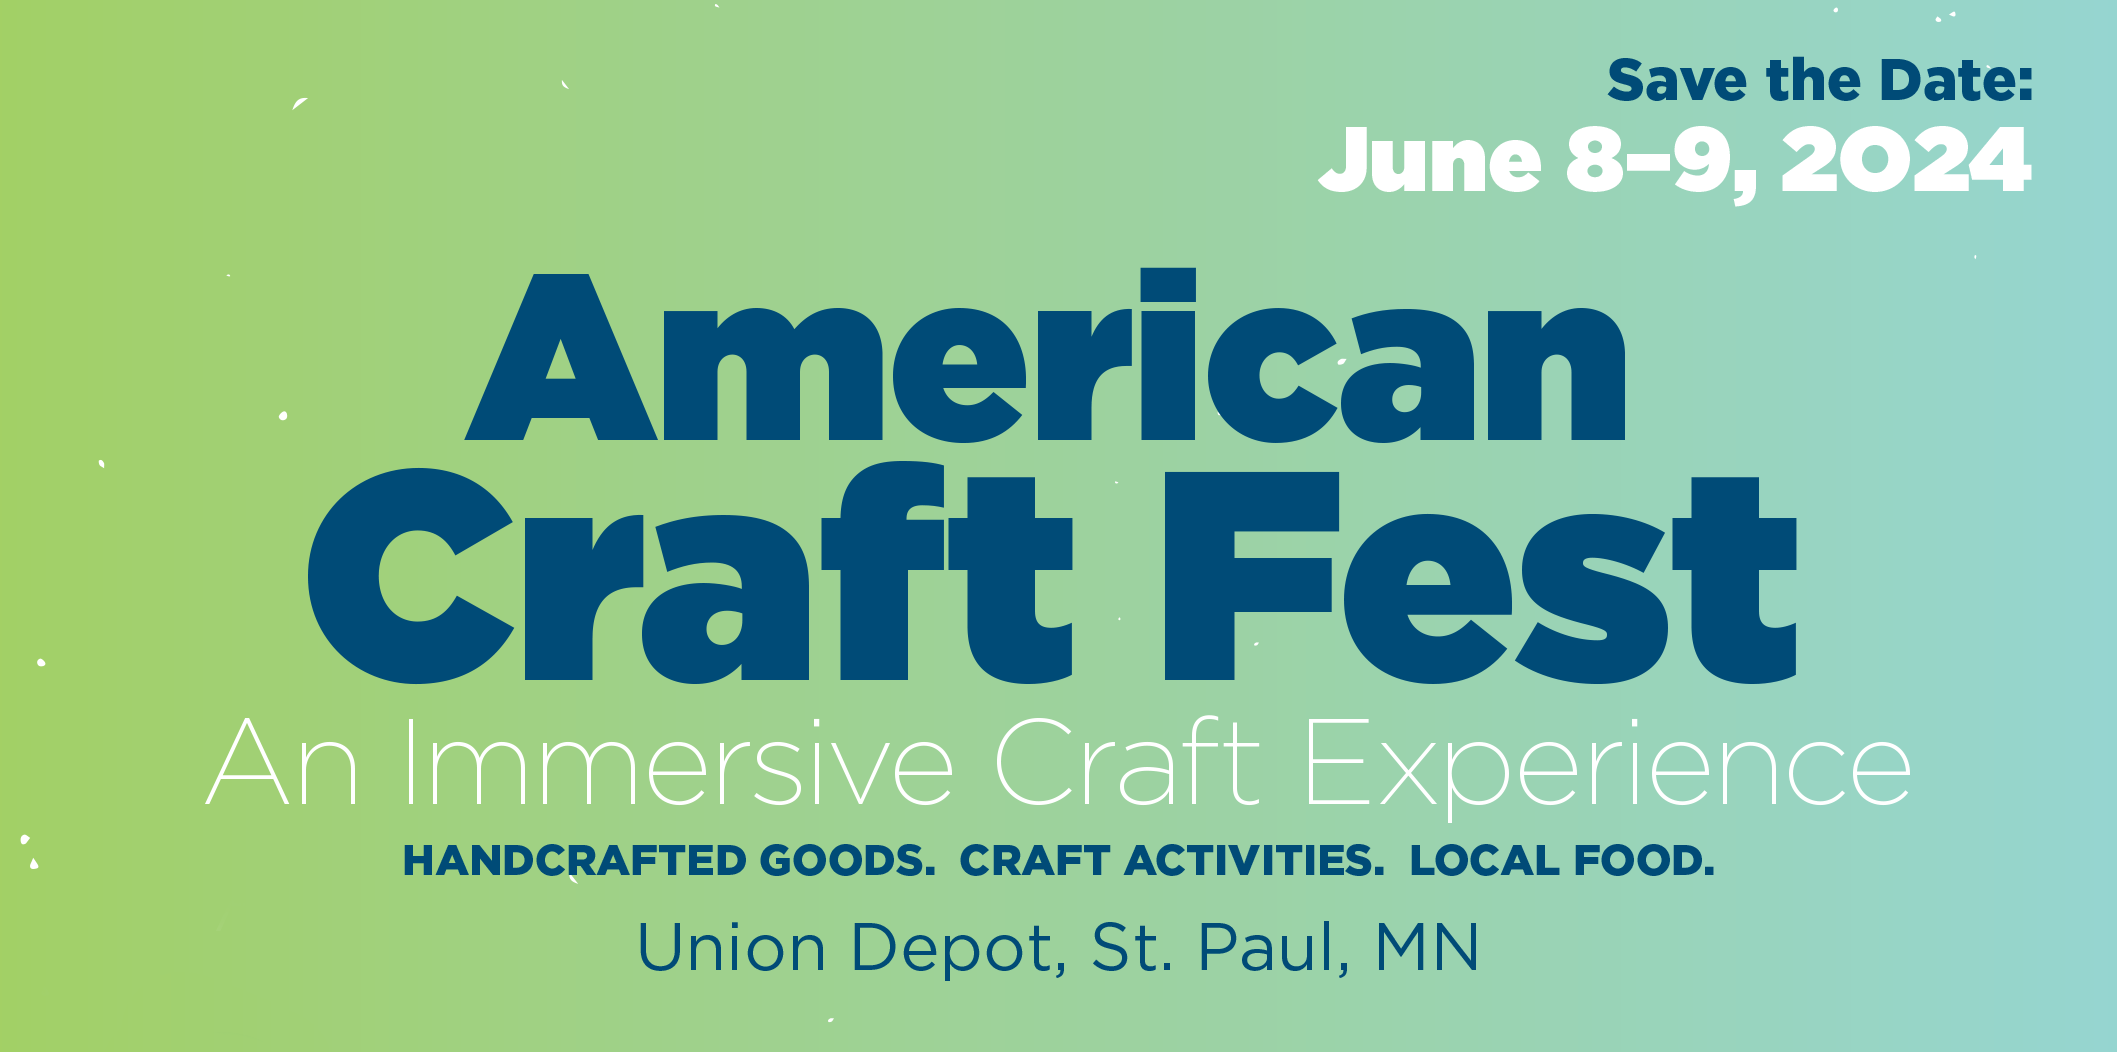 Save the Date: June 7–9, 2O24 An Immersive Craft Experience at Union Depot, St. Paul, MN